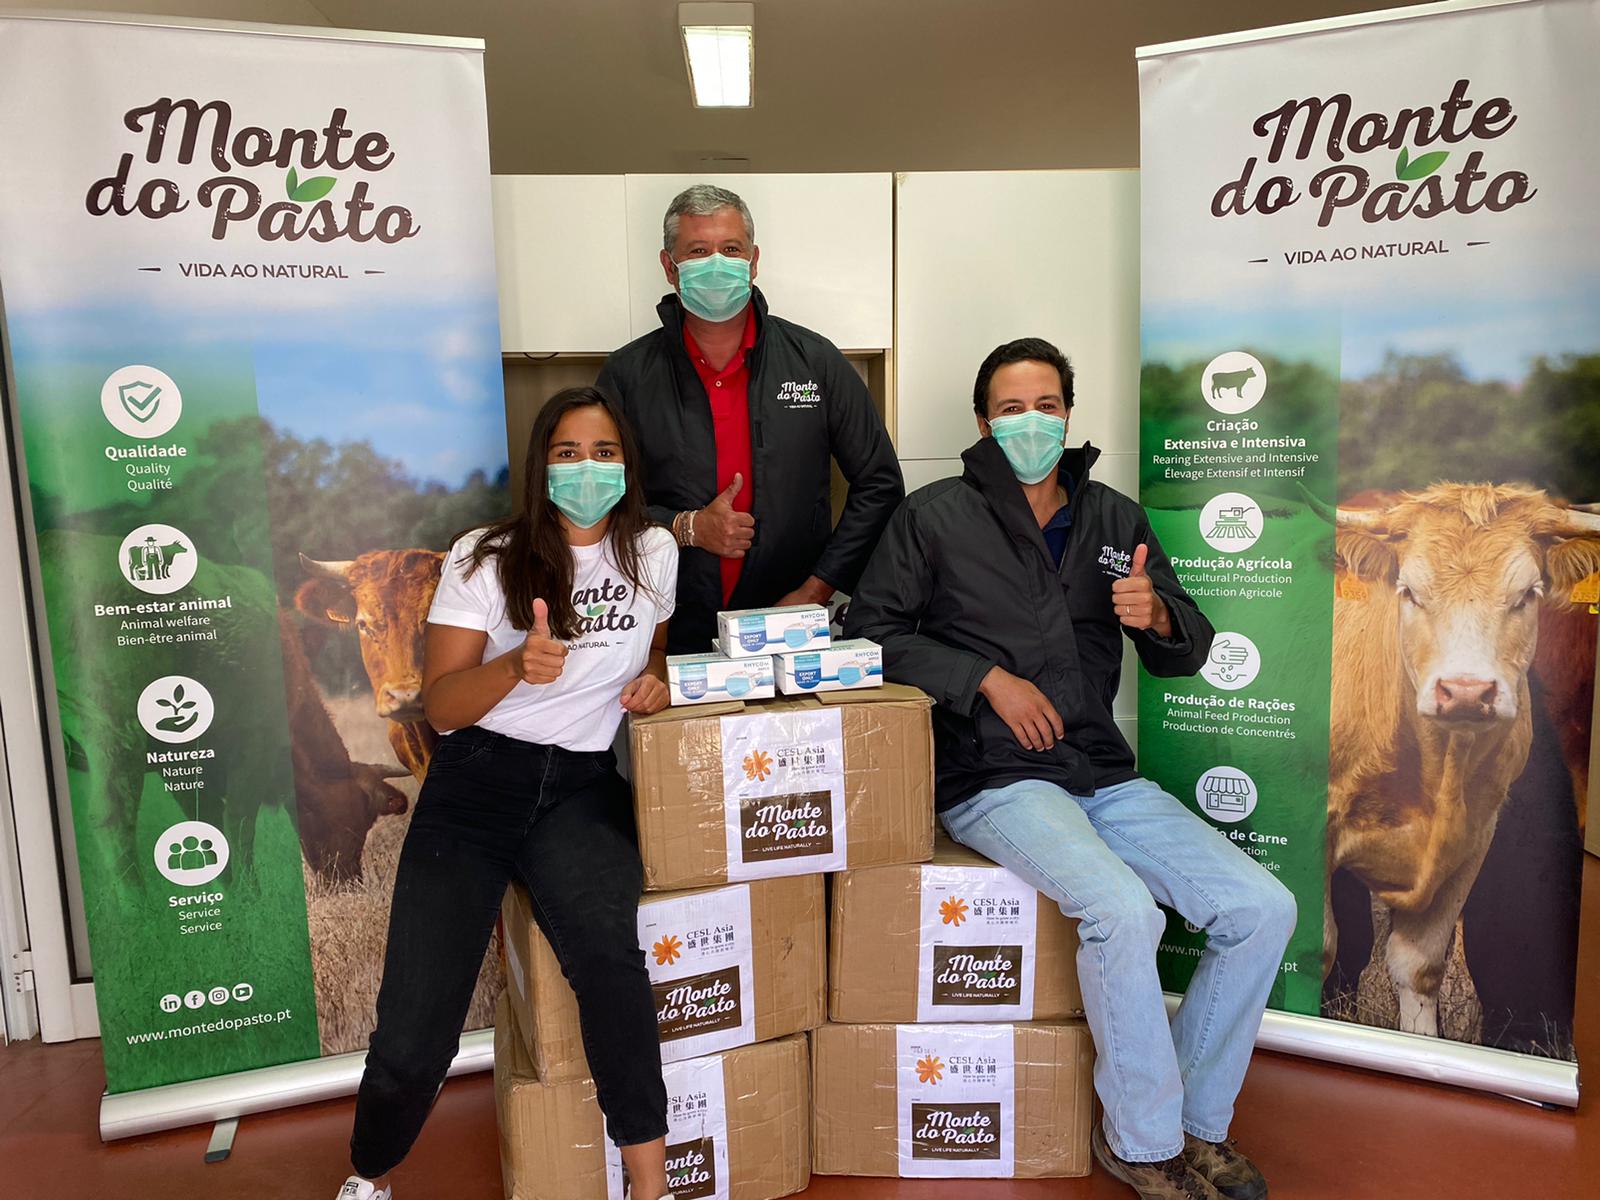 CESL Asia donated masks to support Monde do Pasto and local communities in Alentejo, Portugal 